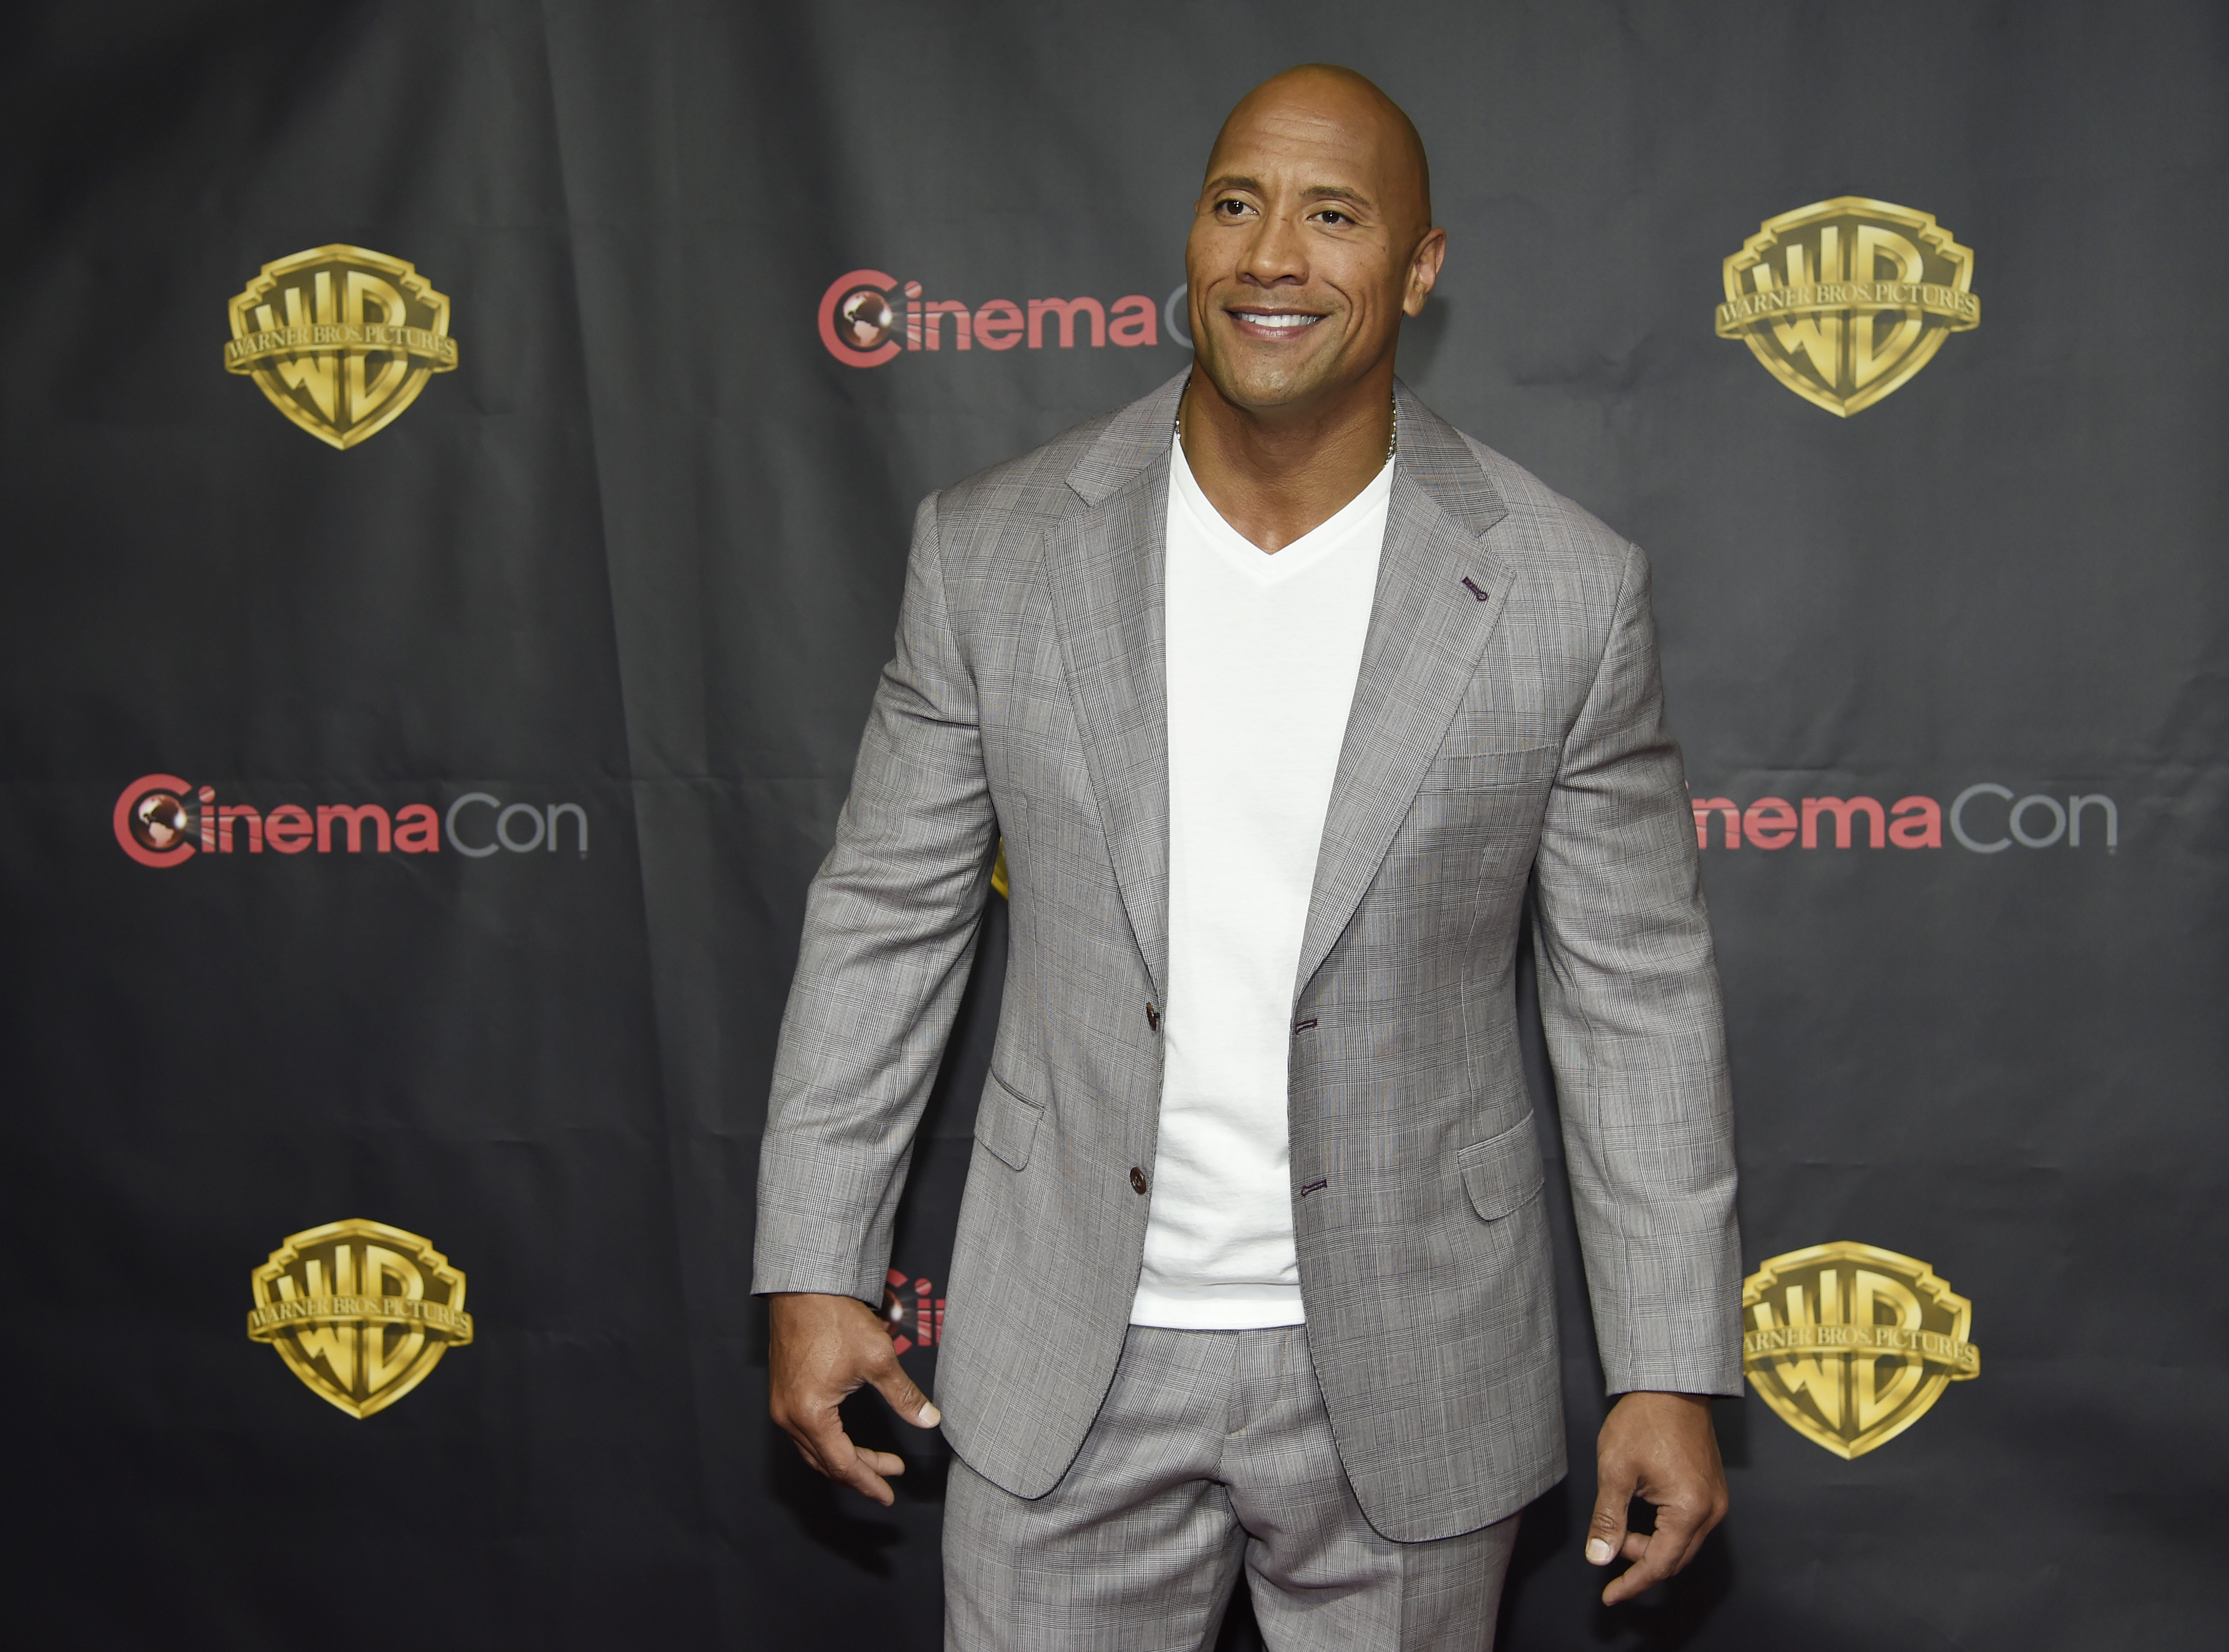 Dwayne Johnson, a cast member in the upcoming film "San Andreas,"  poses before the Warner Bros. presentation at CinemaCon 2015 at Caesars Palace on Tuesday, April 21, 2015, in Las Vegas